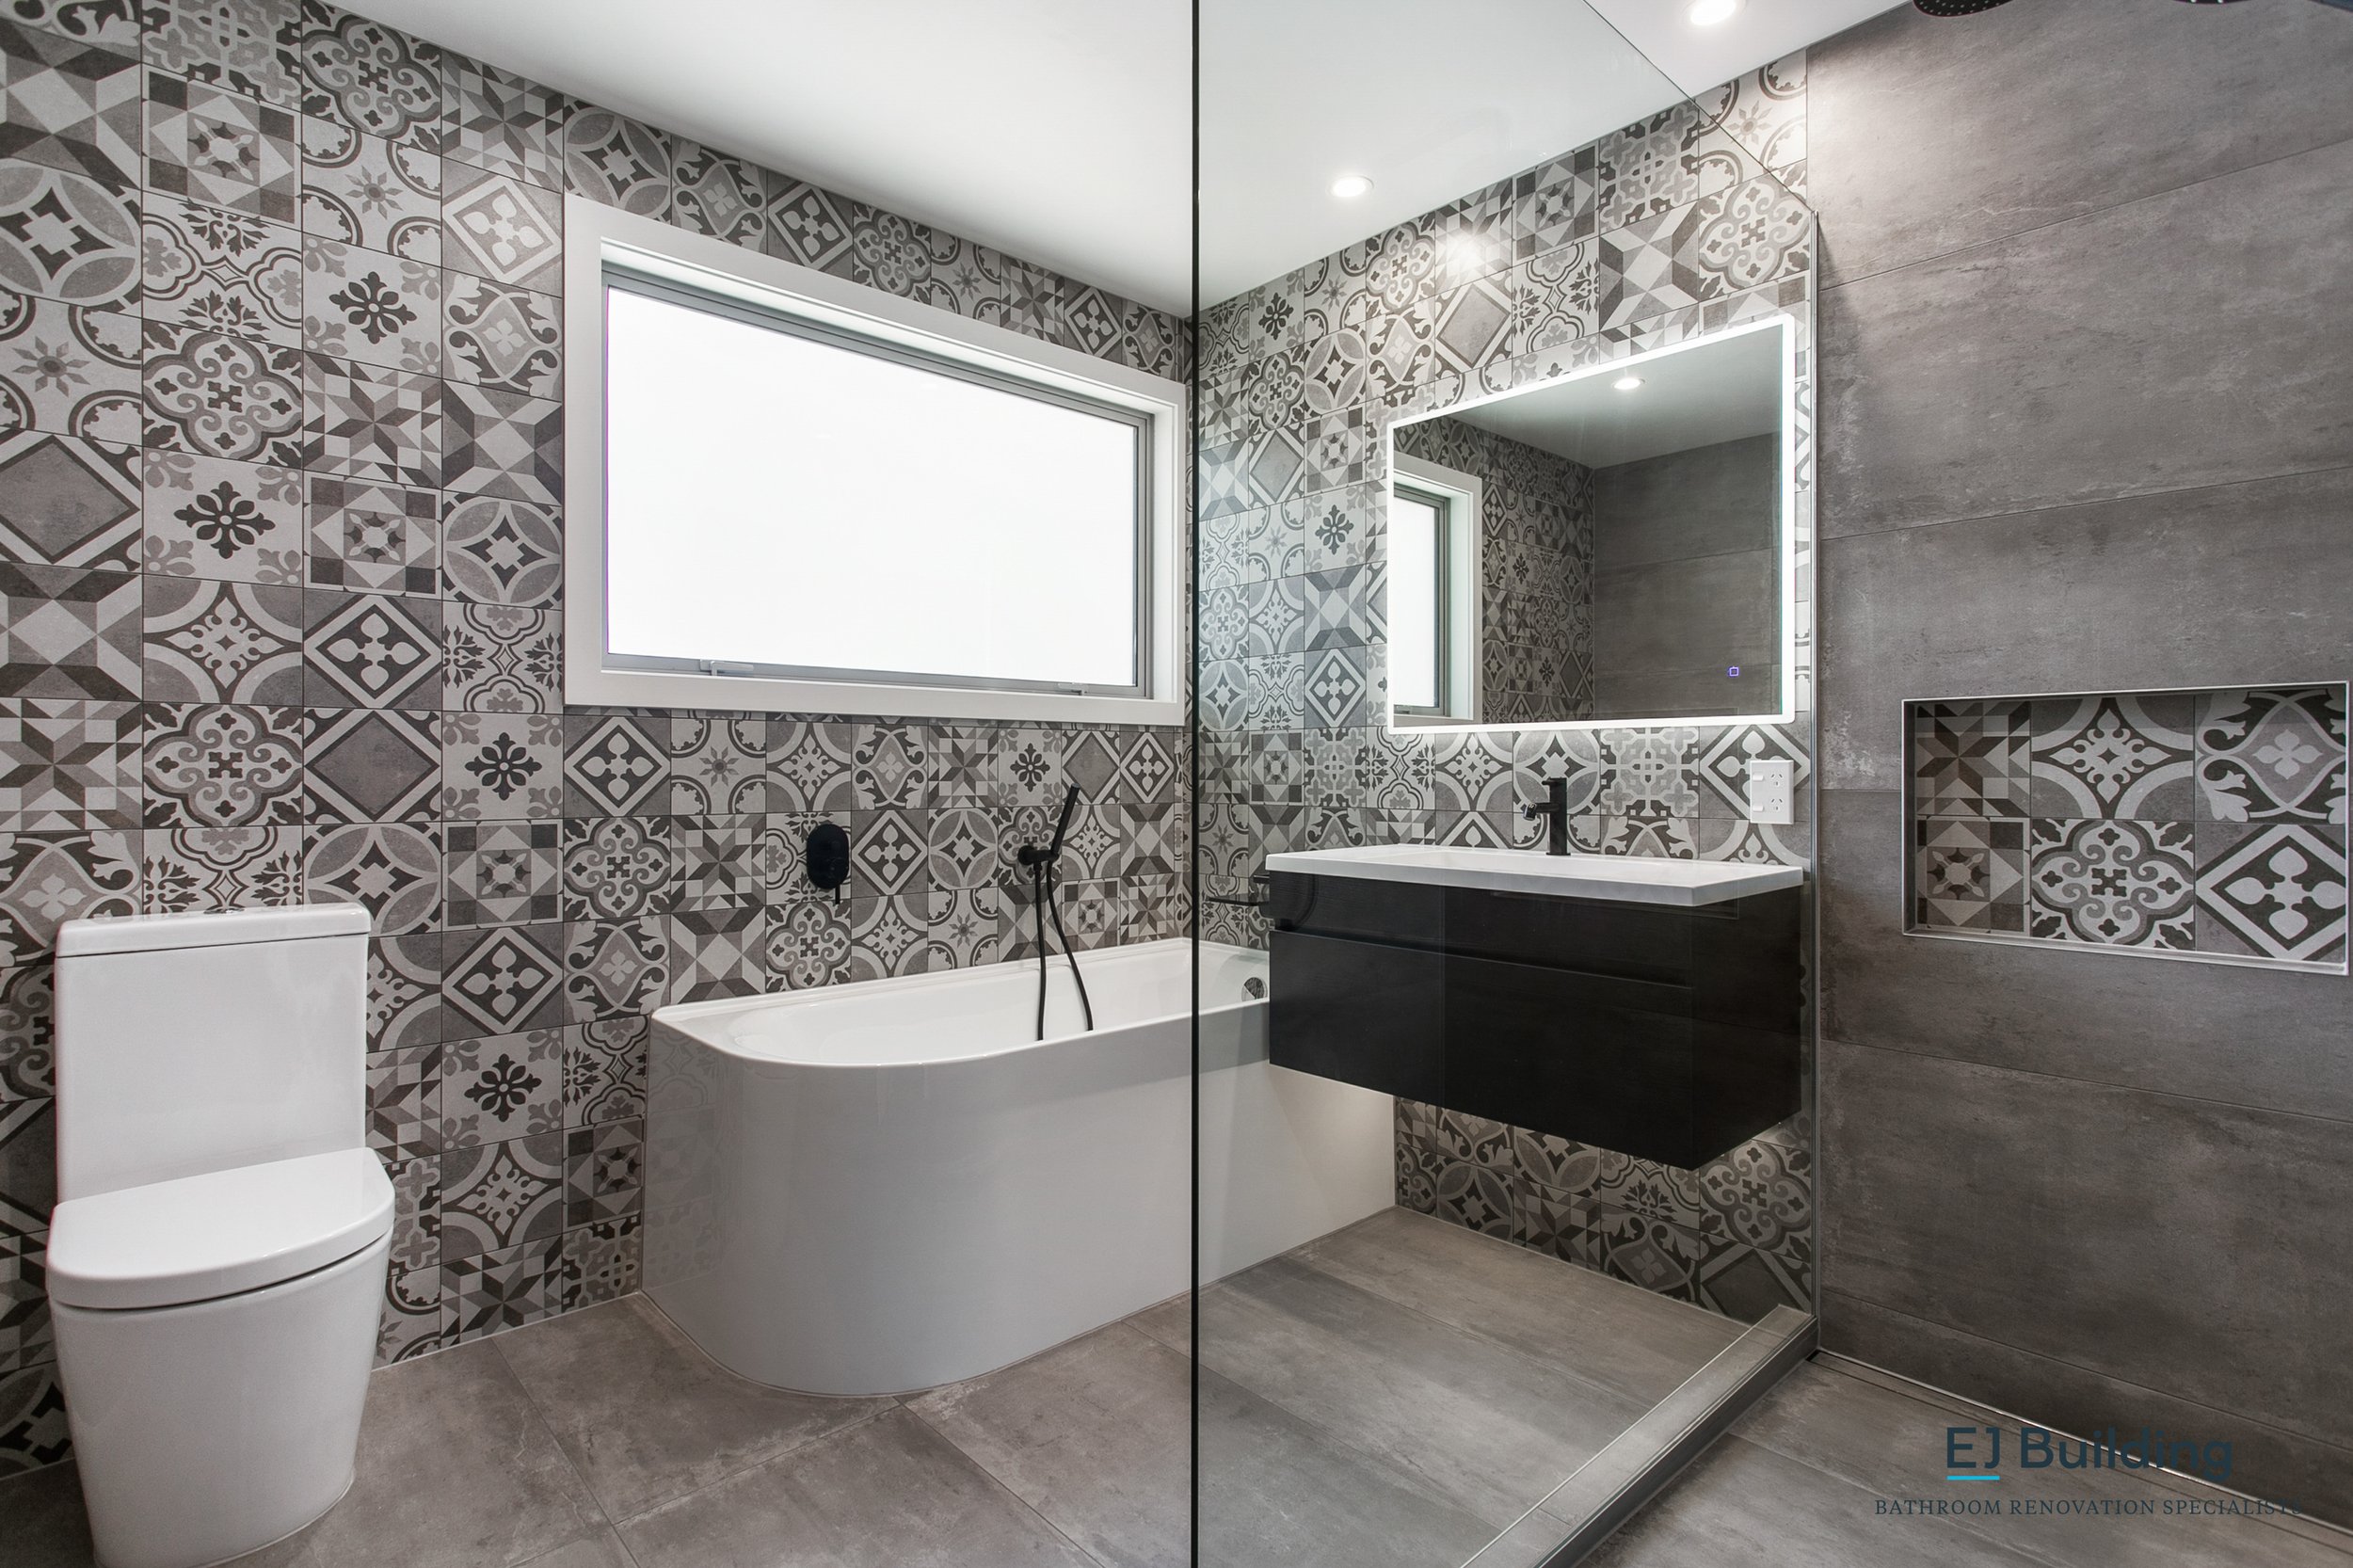 14 Bathroom Renovation Ideas to Boost Home Value - Extra Space Storage